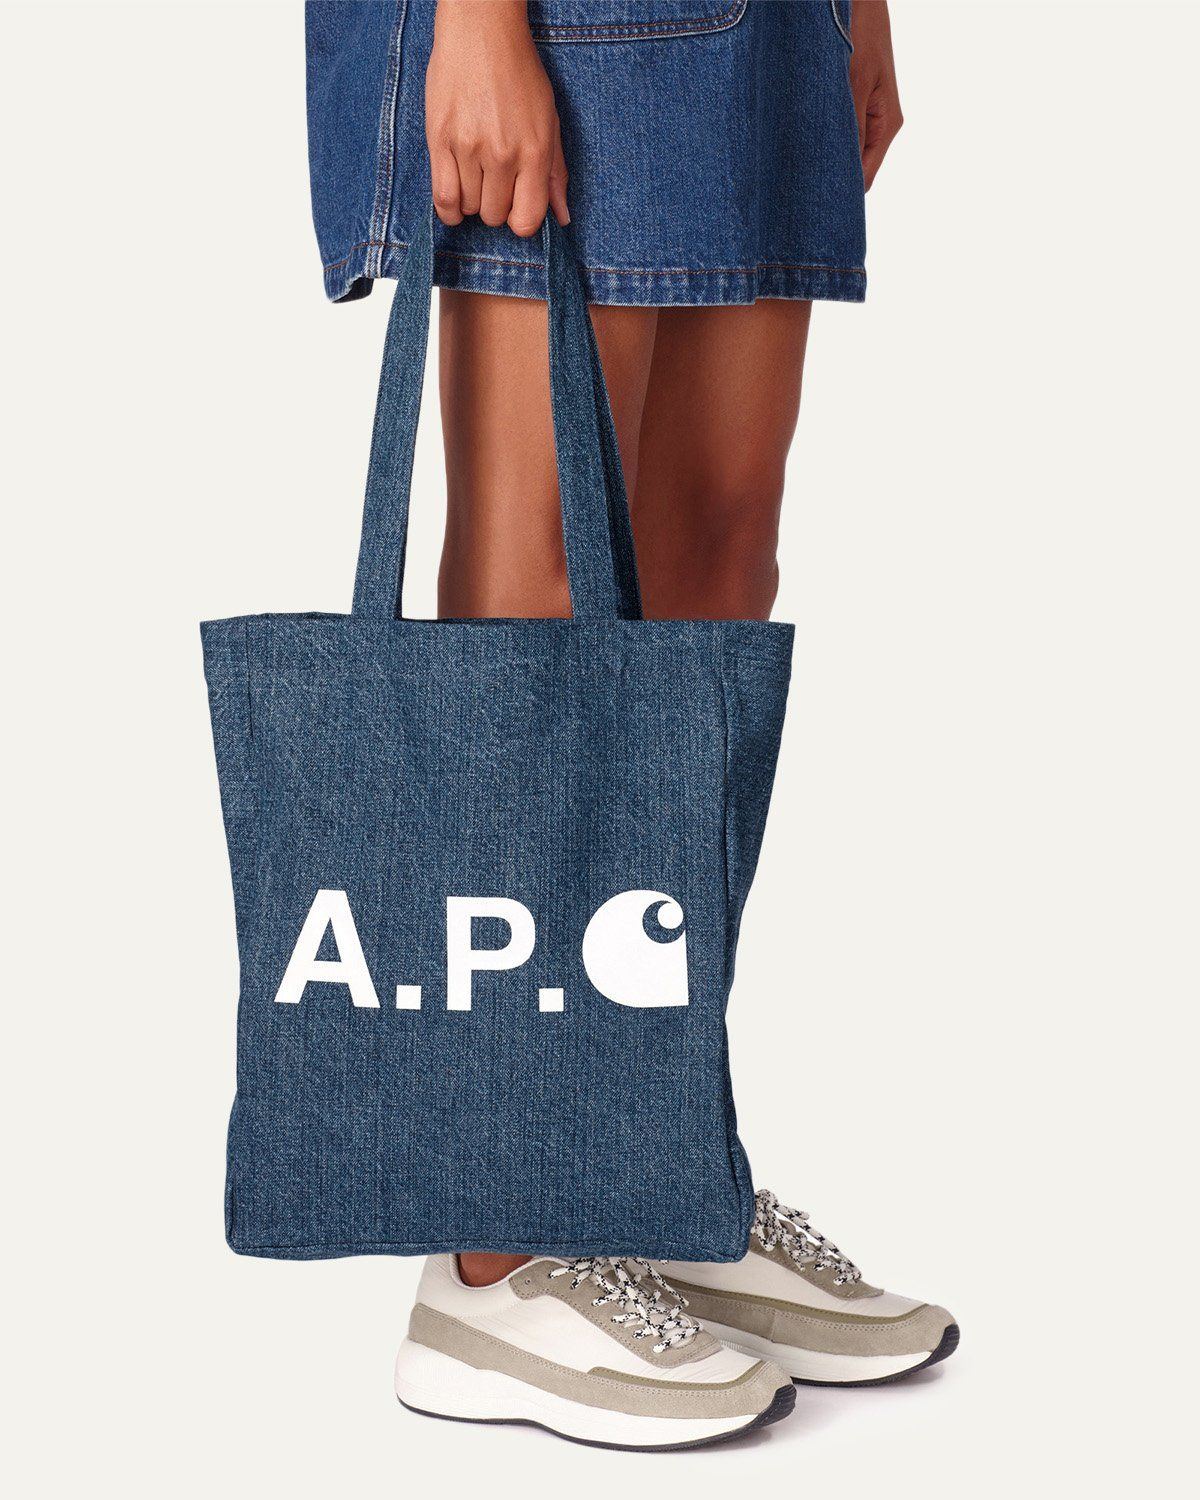 Commonwealth PH - The Alan Tote Bag in Khaki by Carhartt WIP x A.P.C.  features a large contrasting Carhartt x A.P.C. logo on cotton twill, and is  meant to be carried on